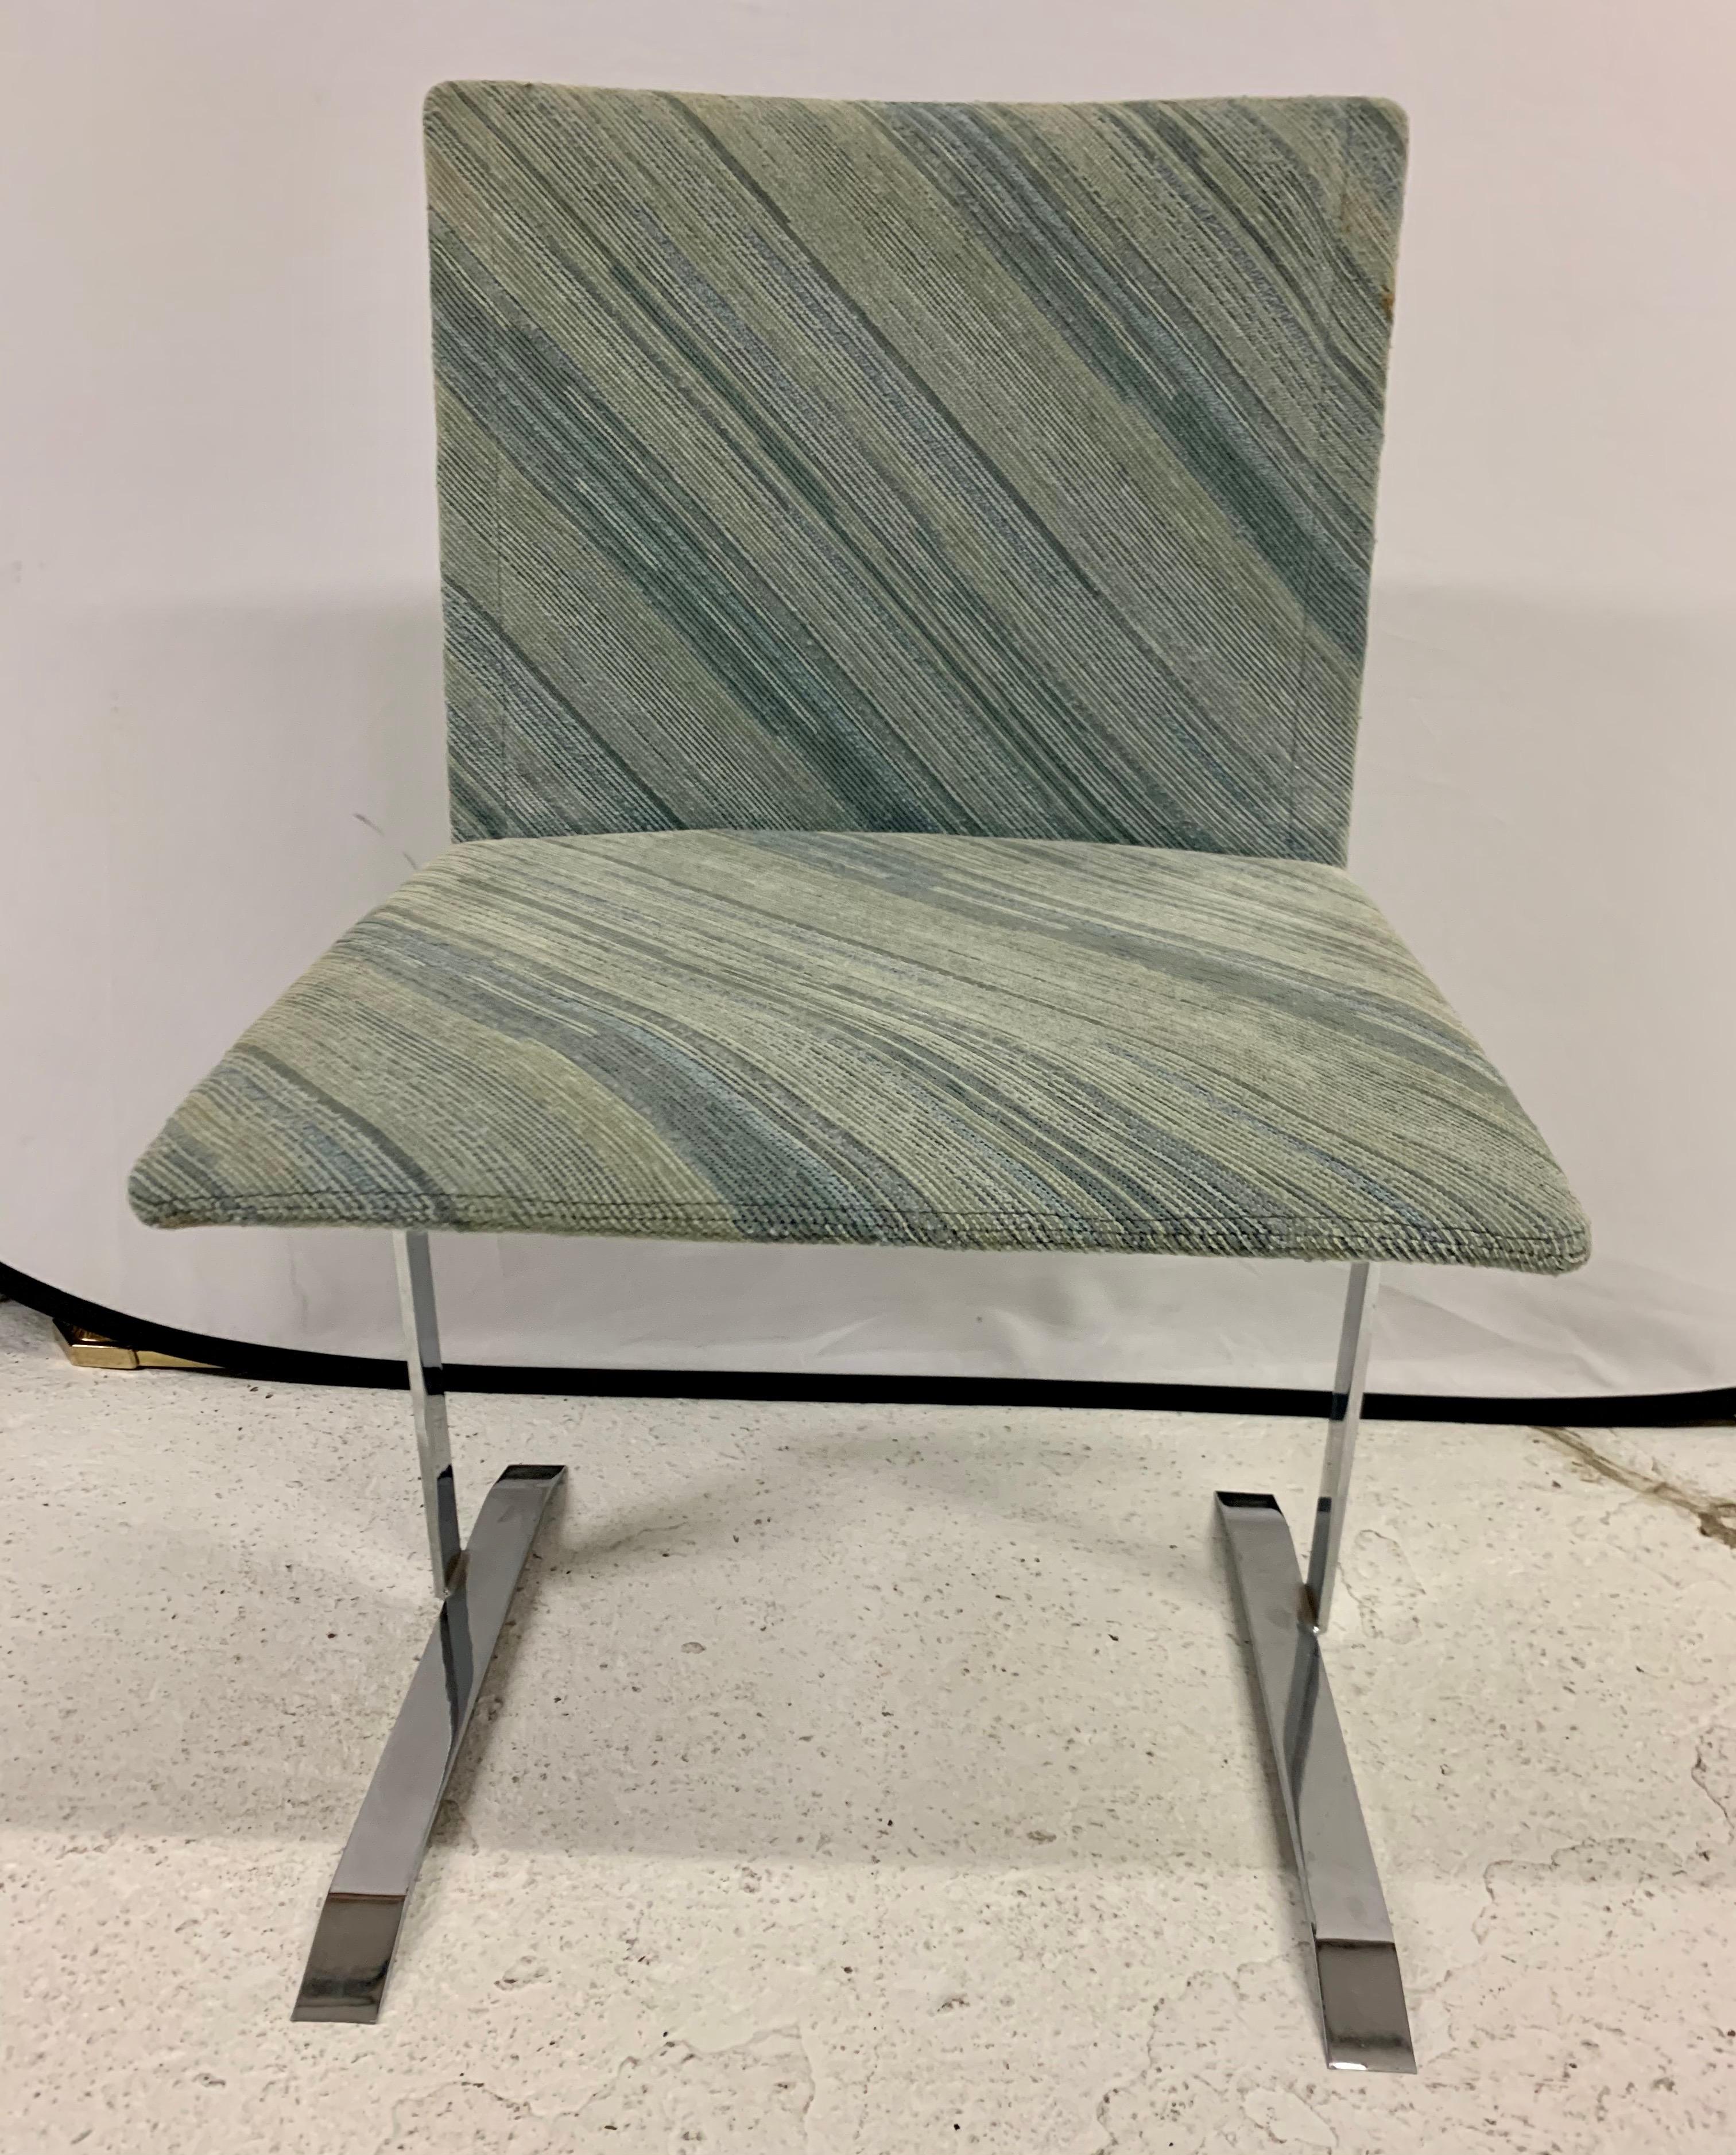 Rare Saporiti set of dining chairs with steel legs and lines to die for. These dining chairs were made in Italy and feature a seafoam, green and blue color scheme on the seat fabric. Designed by Giovanni Offredi. Circa 1970's.